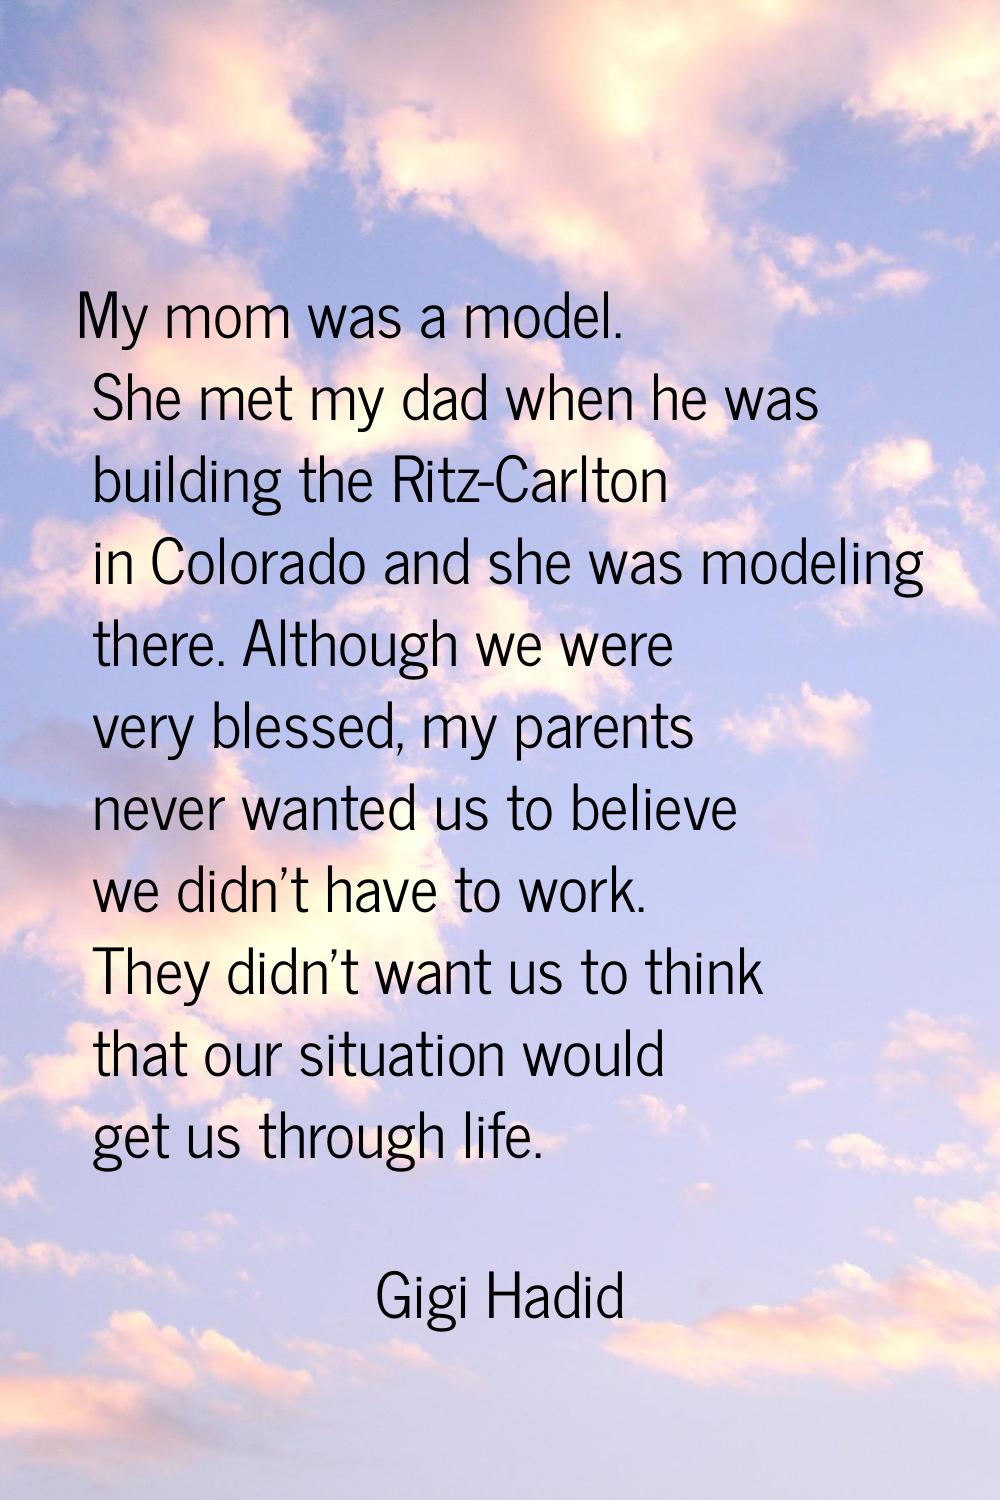 My mom was a model. She met my dad when he was building the Ritz-Carlton in Colorado and she was mo